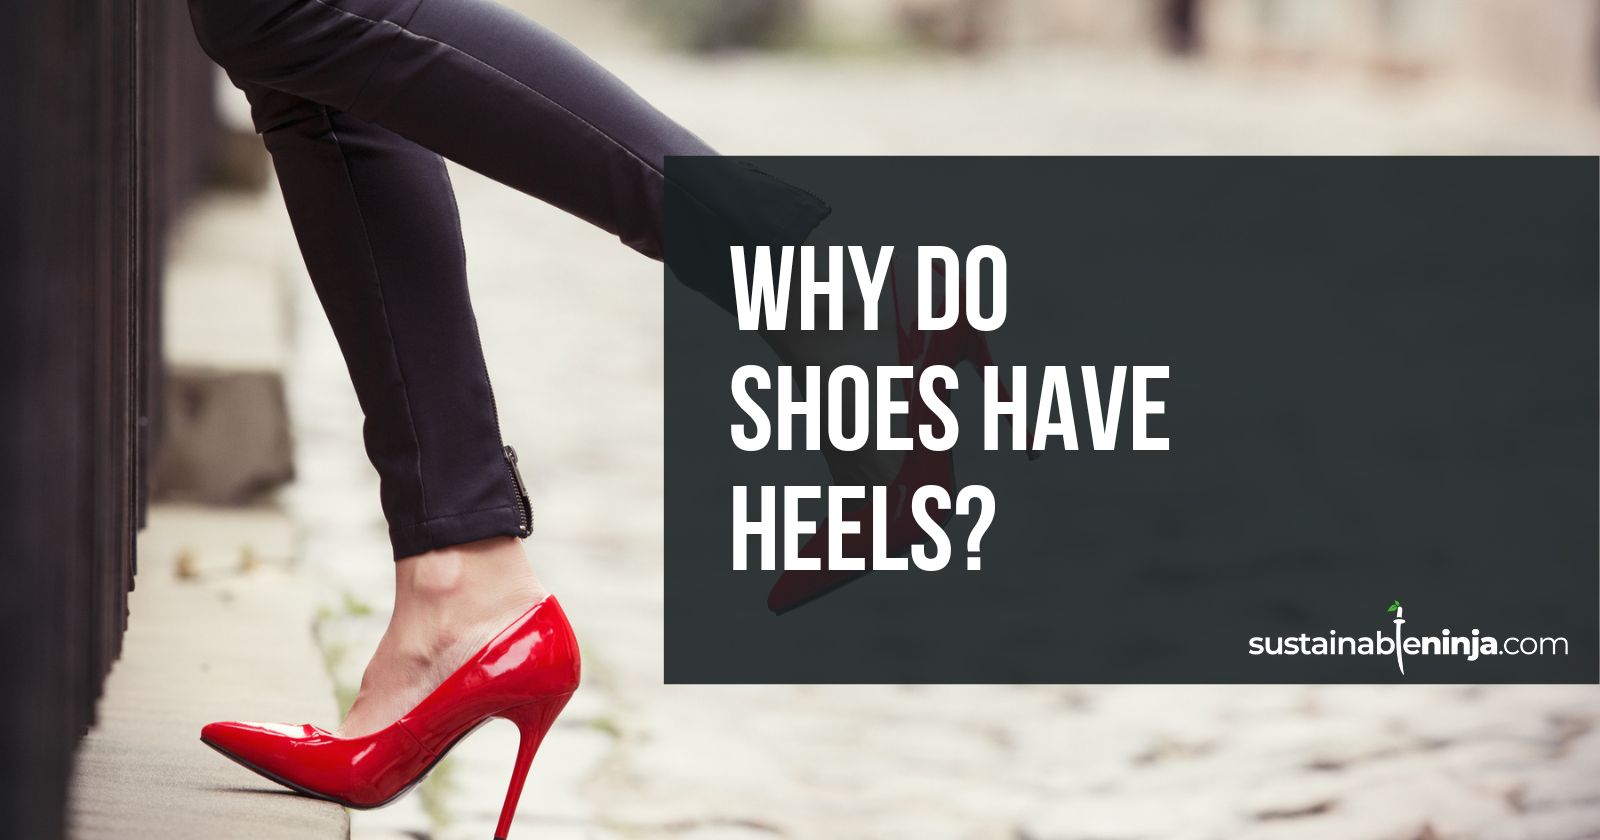 13 Tips That Will Help Take the Pain Out of Wearing High Heels